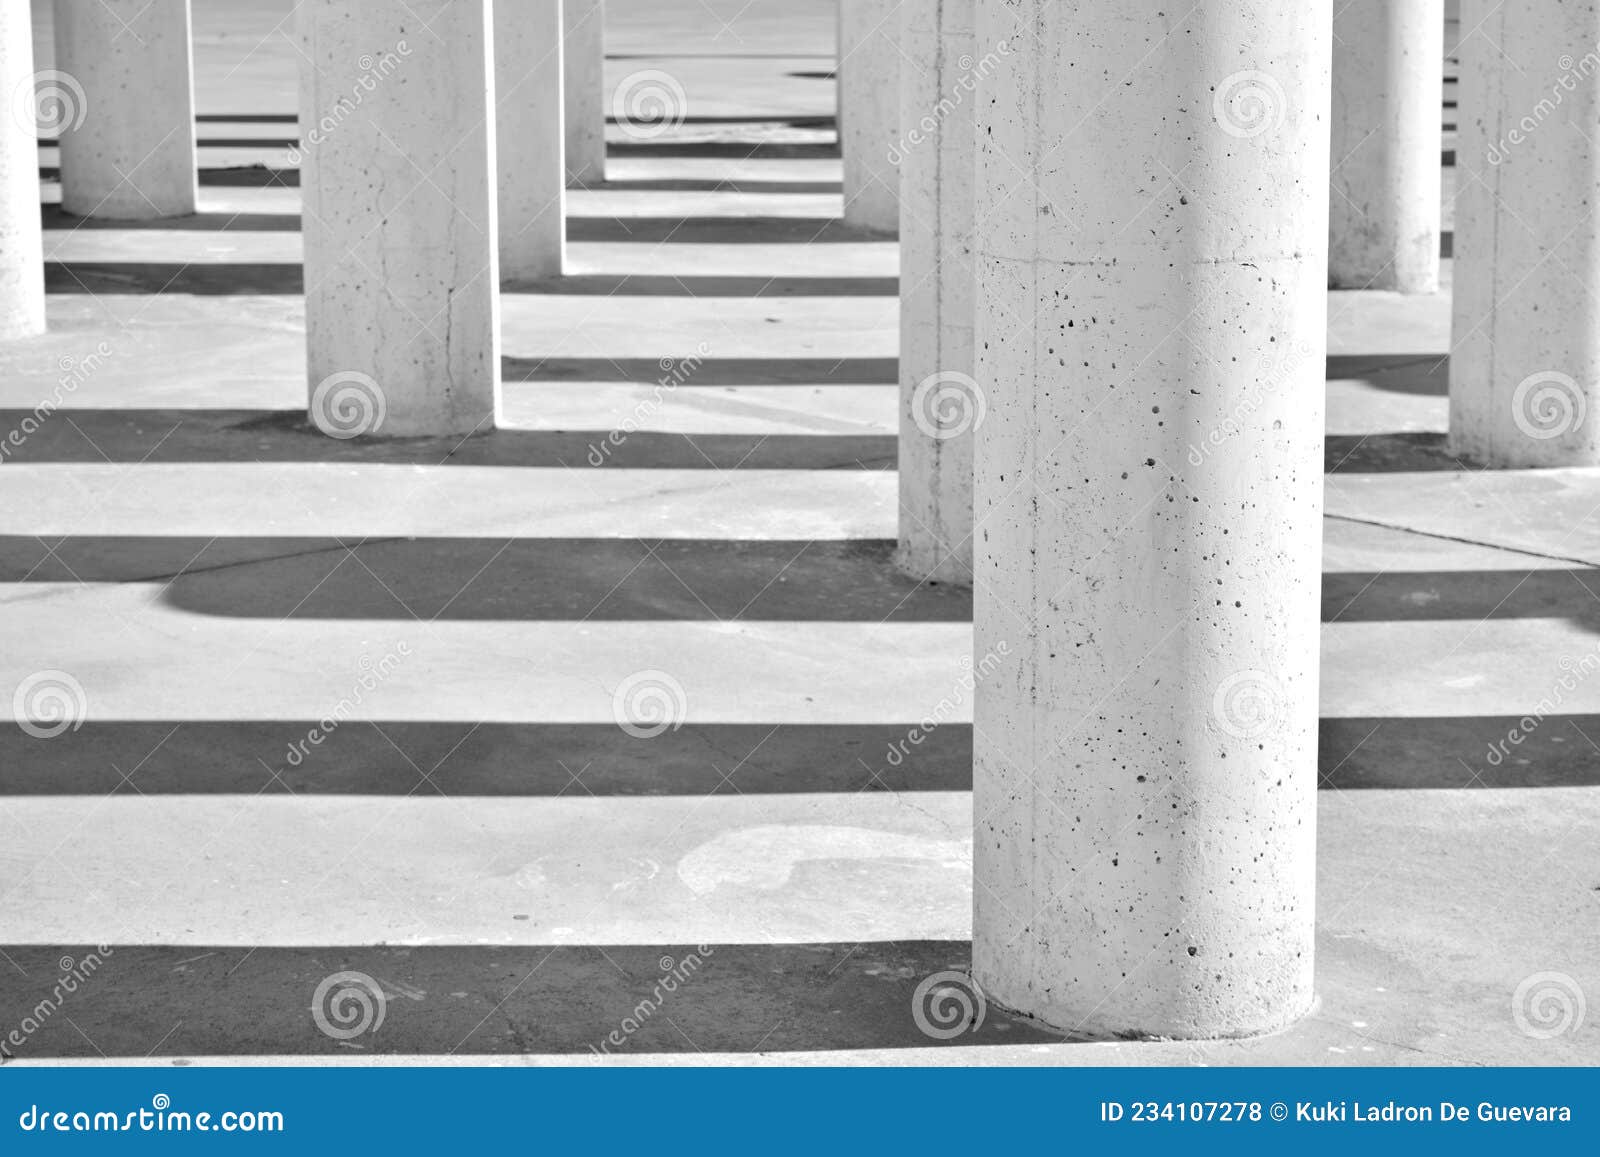 columns and their shadows, black and white